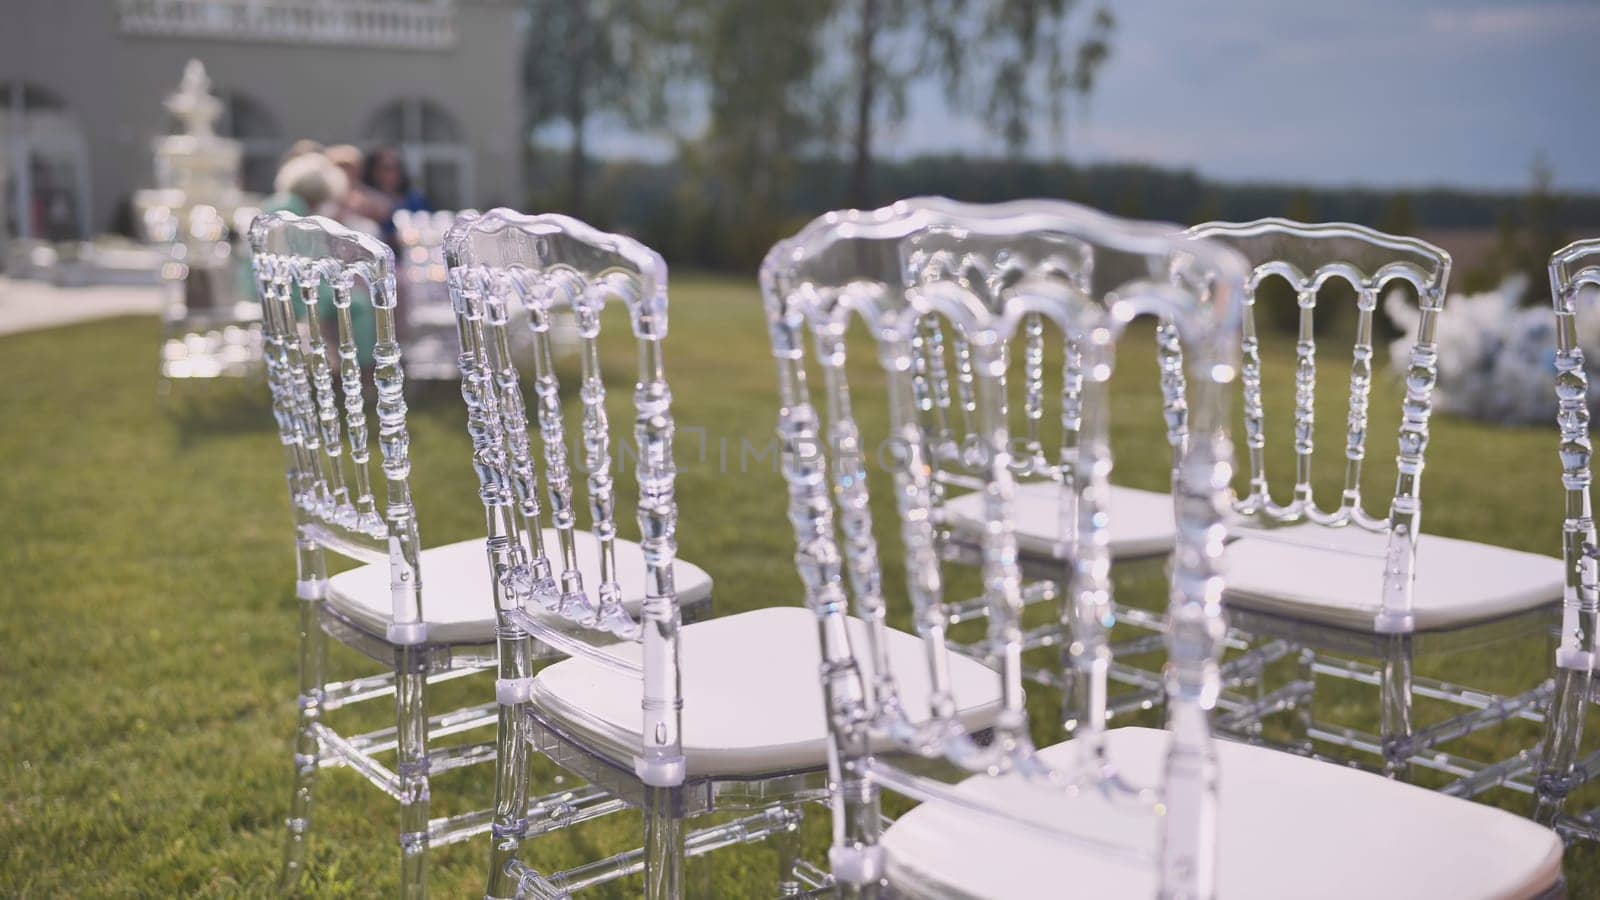 Chairs at the offsite wedding ceremony